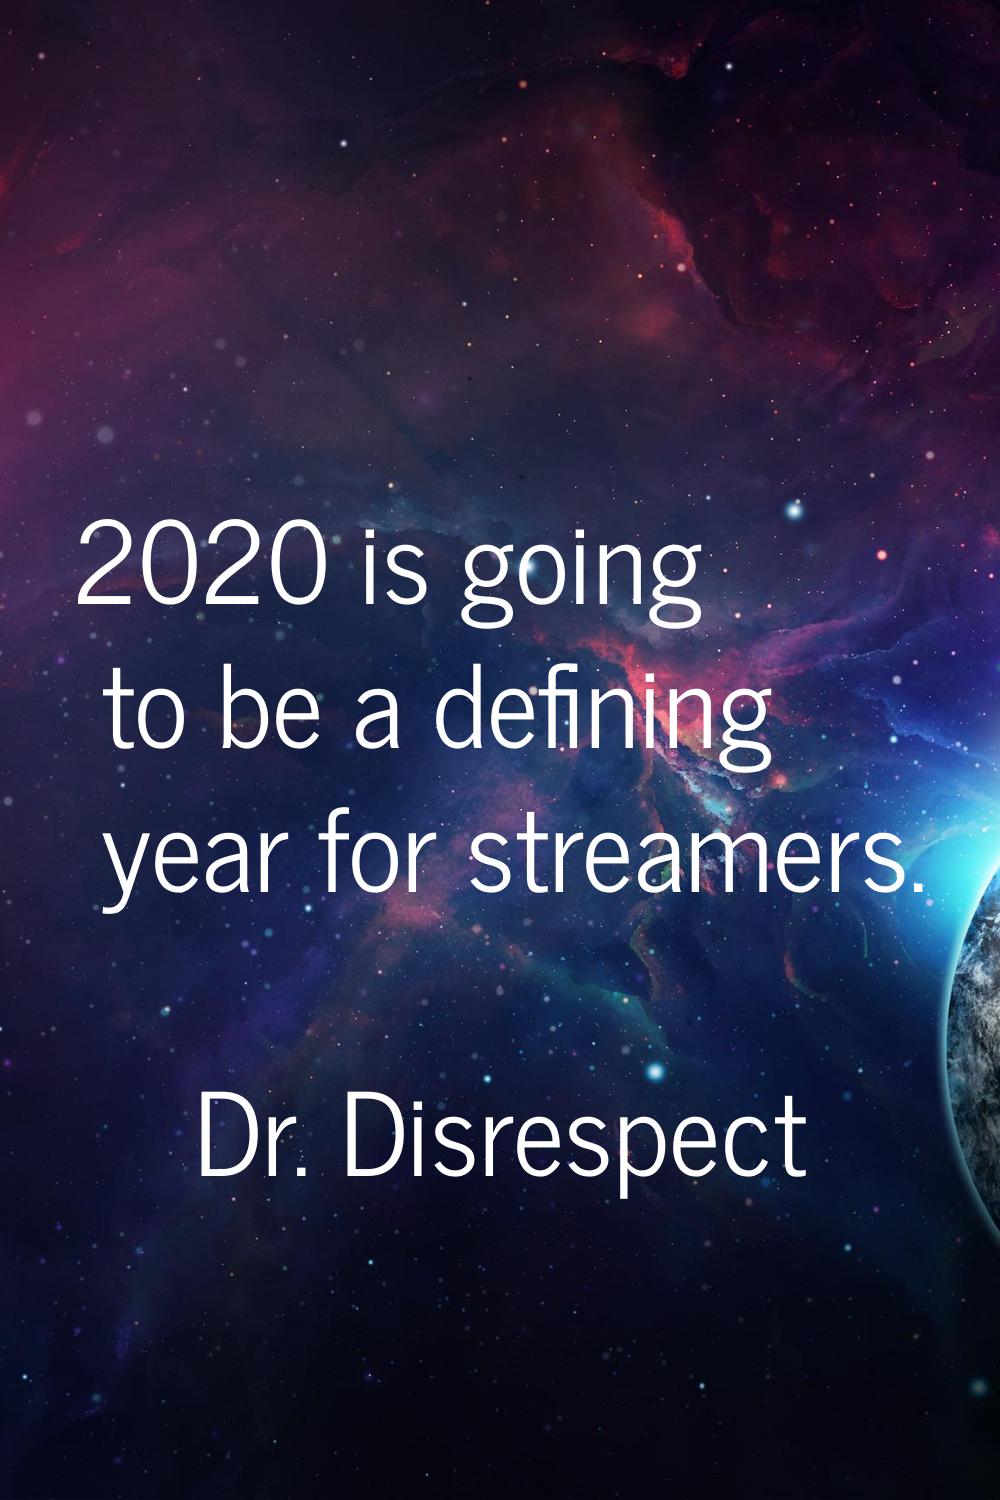 2020 is going to be a defining year for streamers.